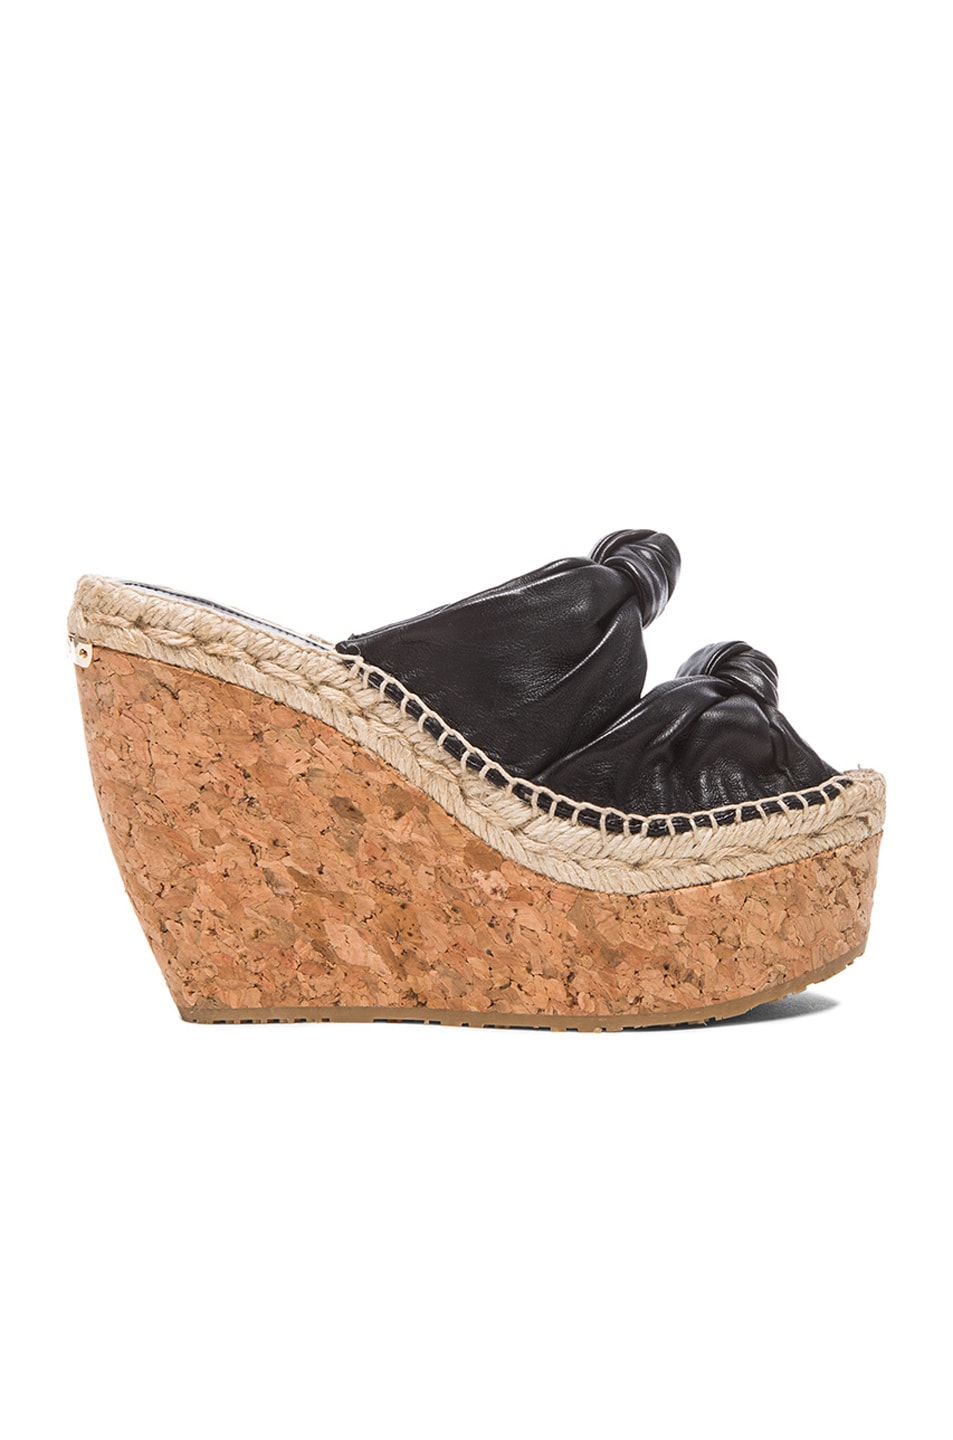 Image 1 of Jimmy Choo Priory Leather Wedges in Black